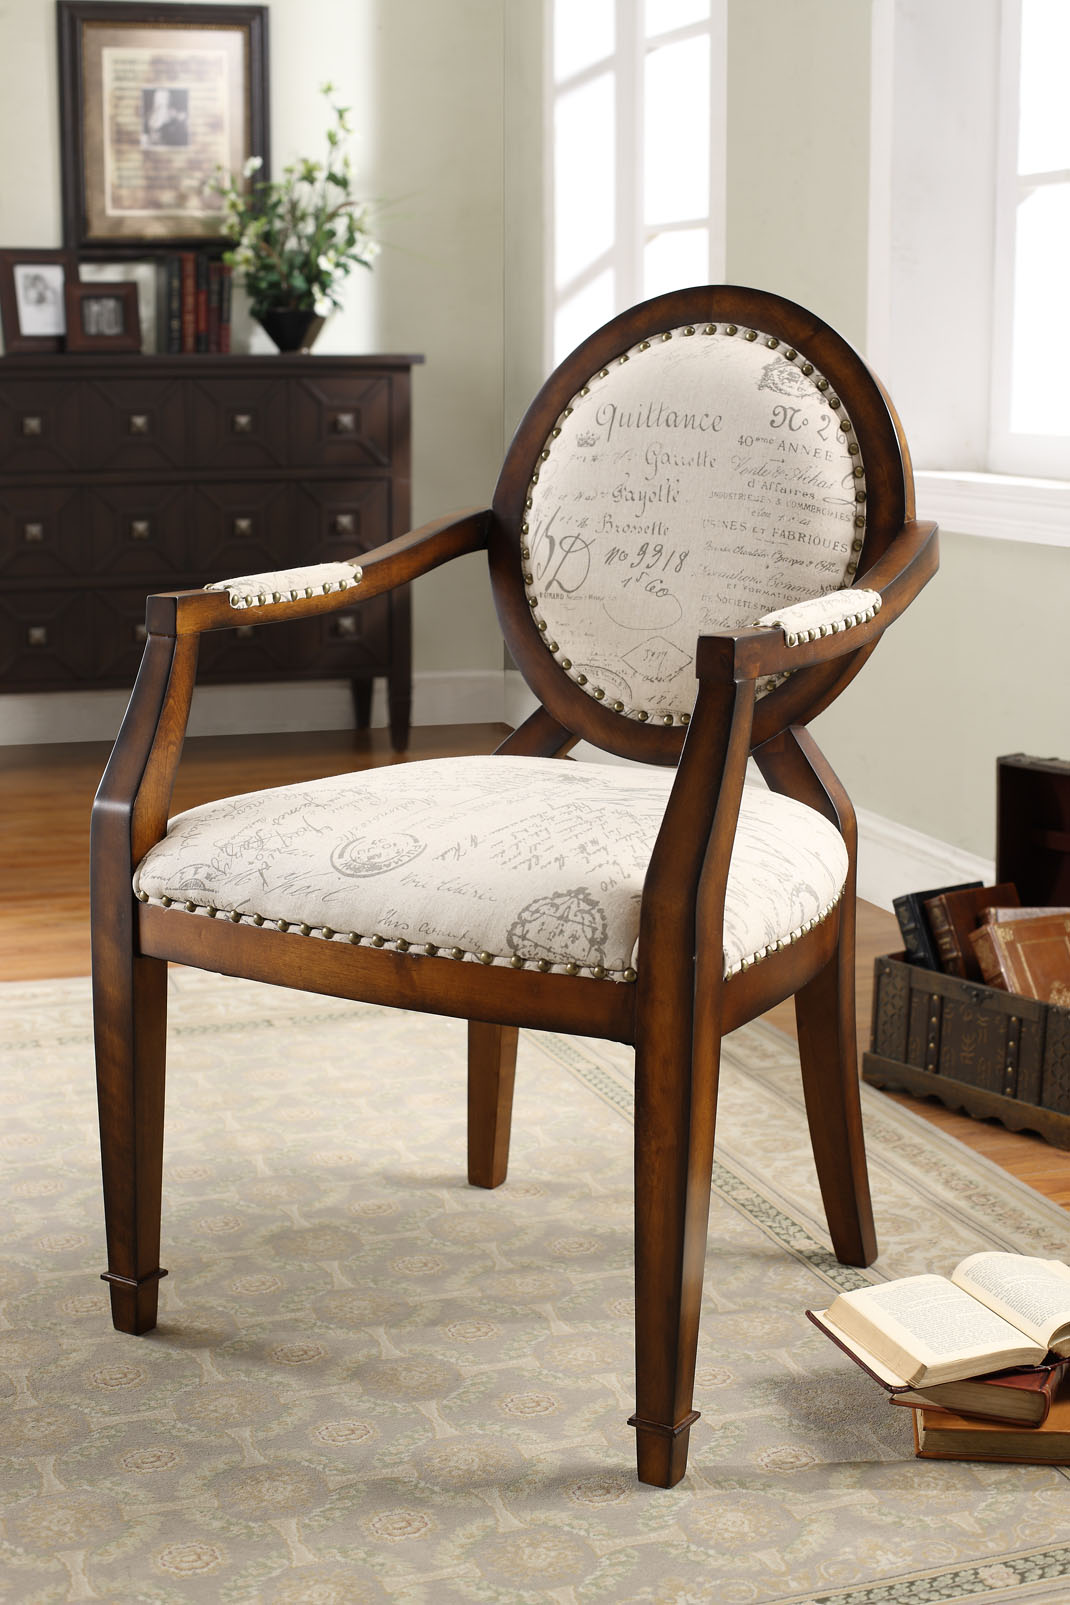 Amazing Antique Wooden Chair Designs for Timeless Elegance 